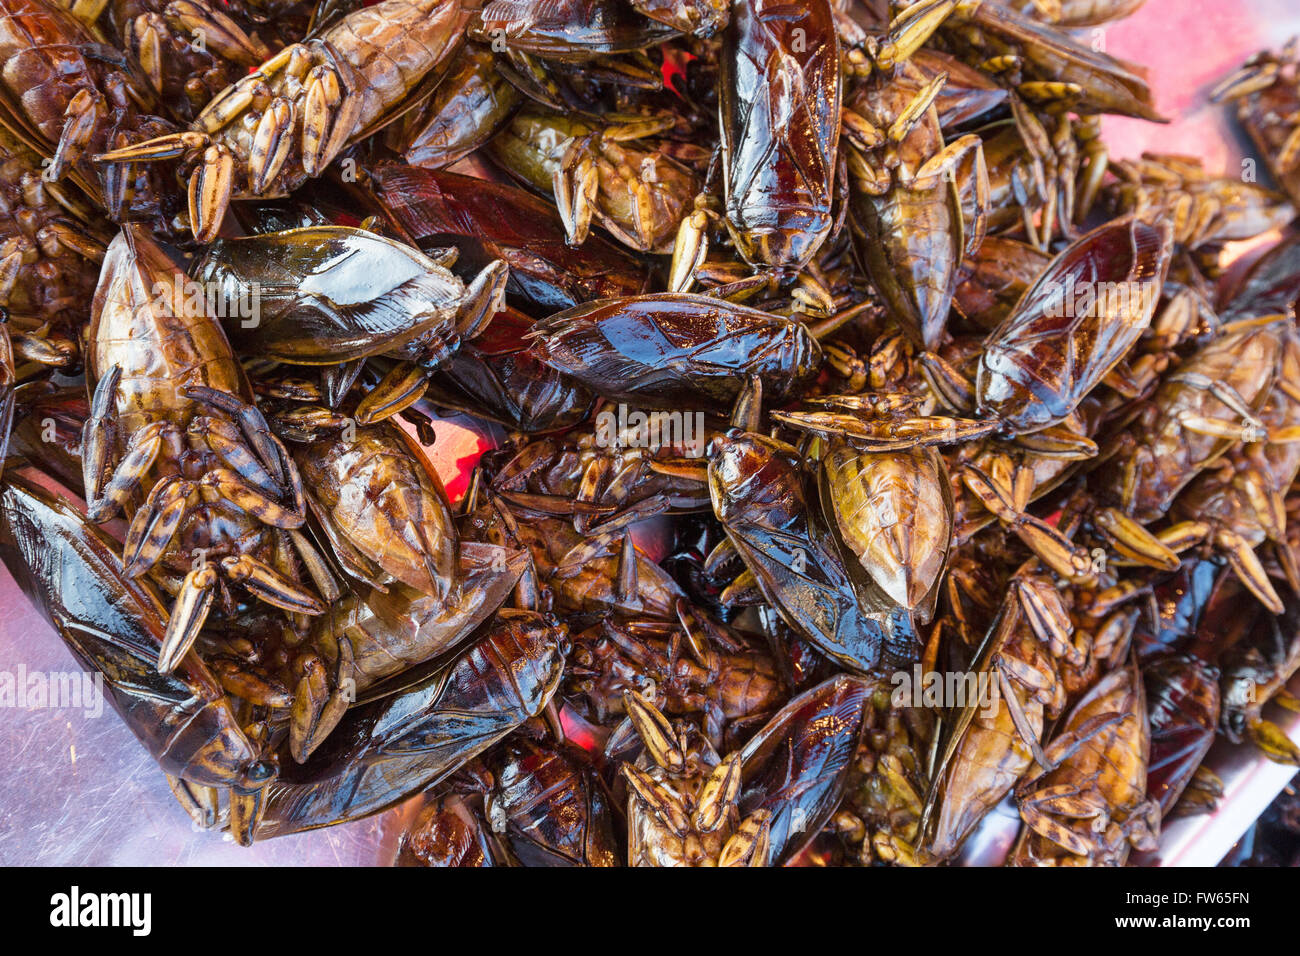 Mangda, fried water bugs (Lethocerus indicus) on a market, edible insects, Thai cuisine, specialty, Thailand Stock Photo